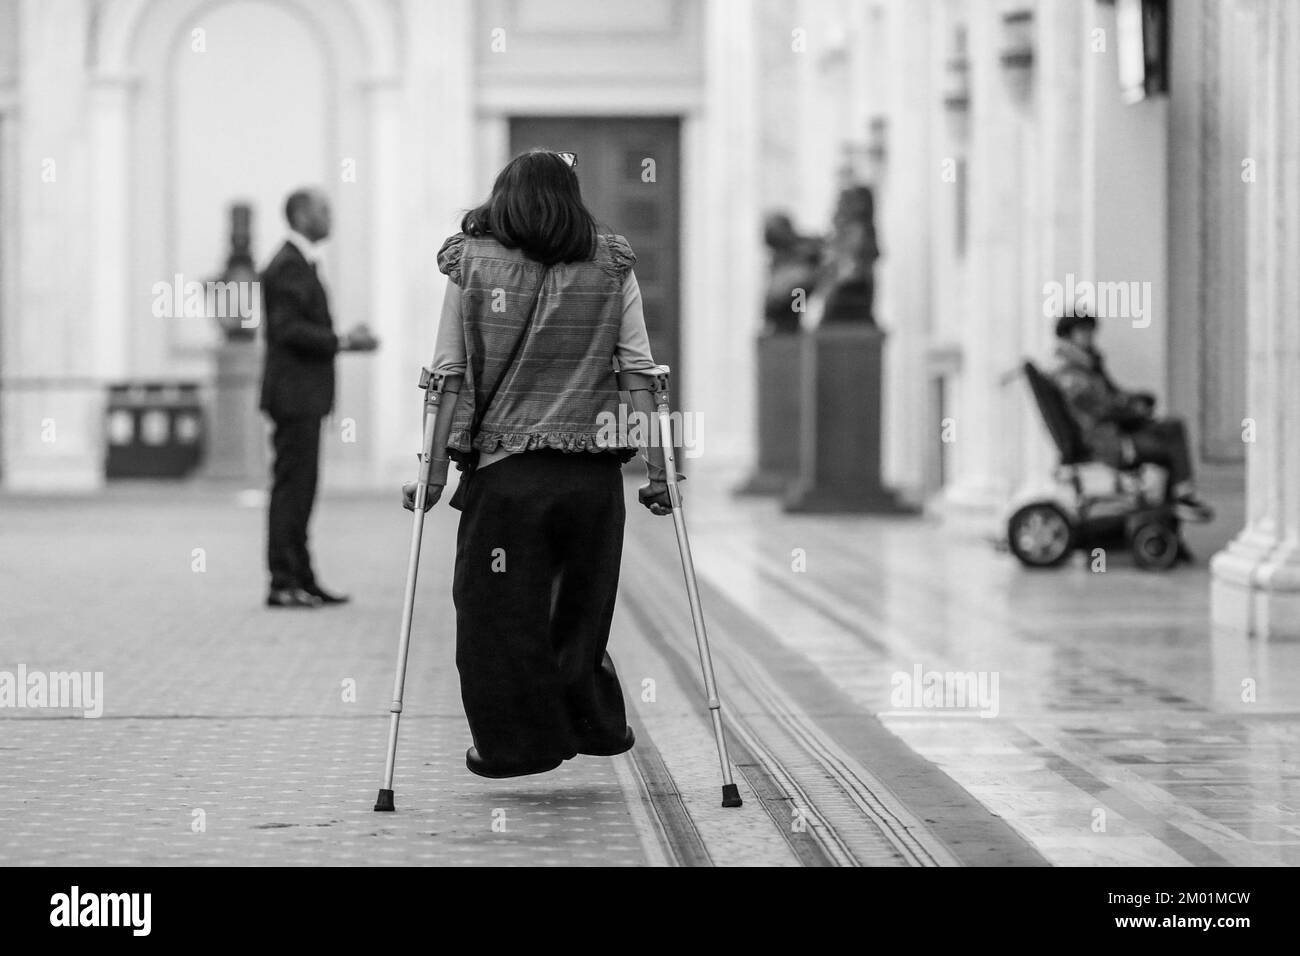 Shallow depth of field (selective focus) details with a woman using crutches. Stock Photo